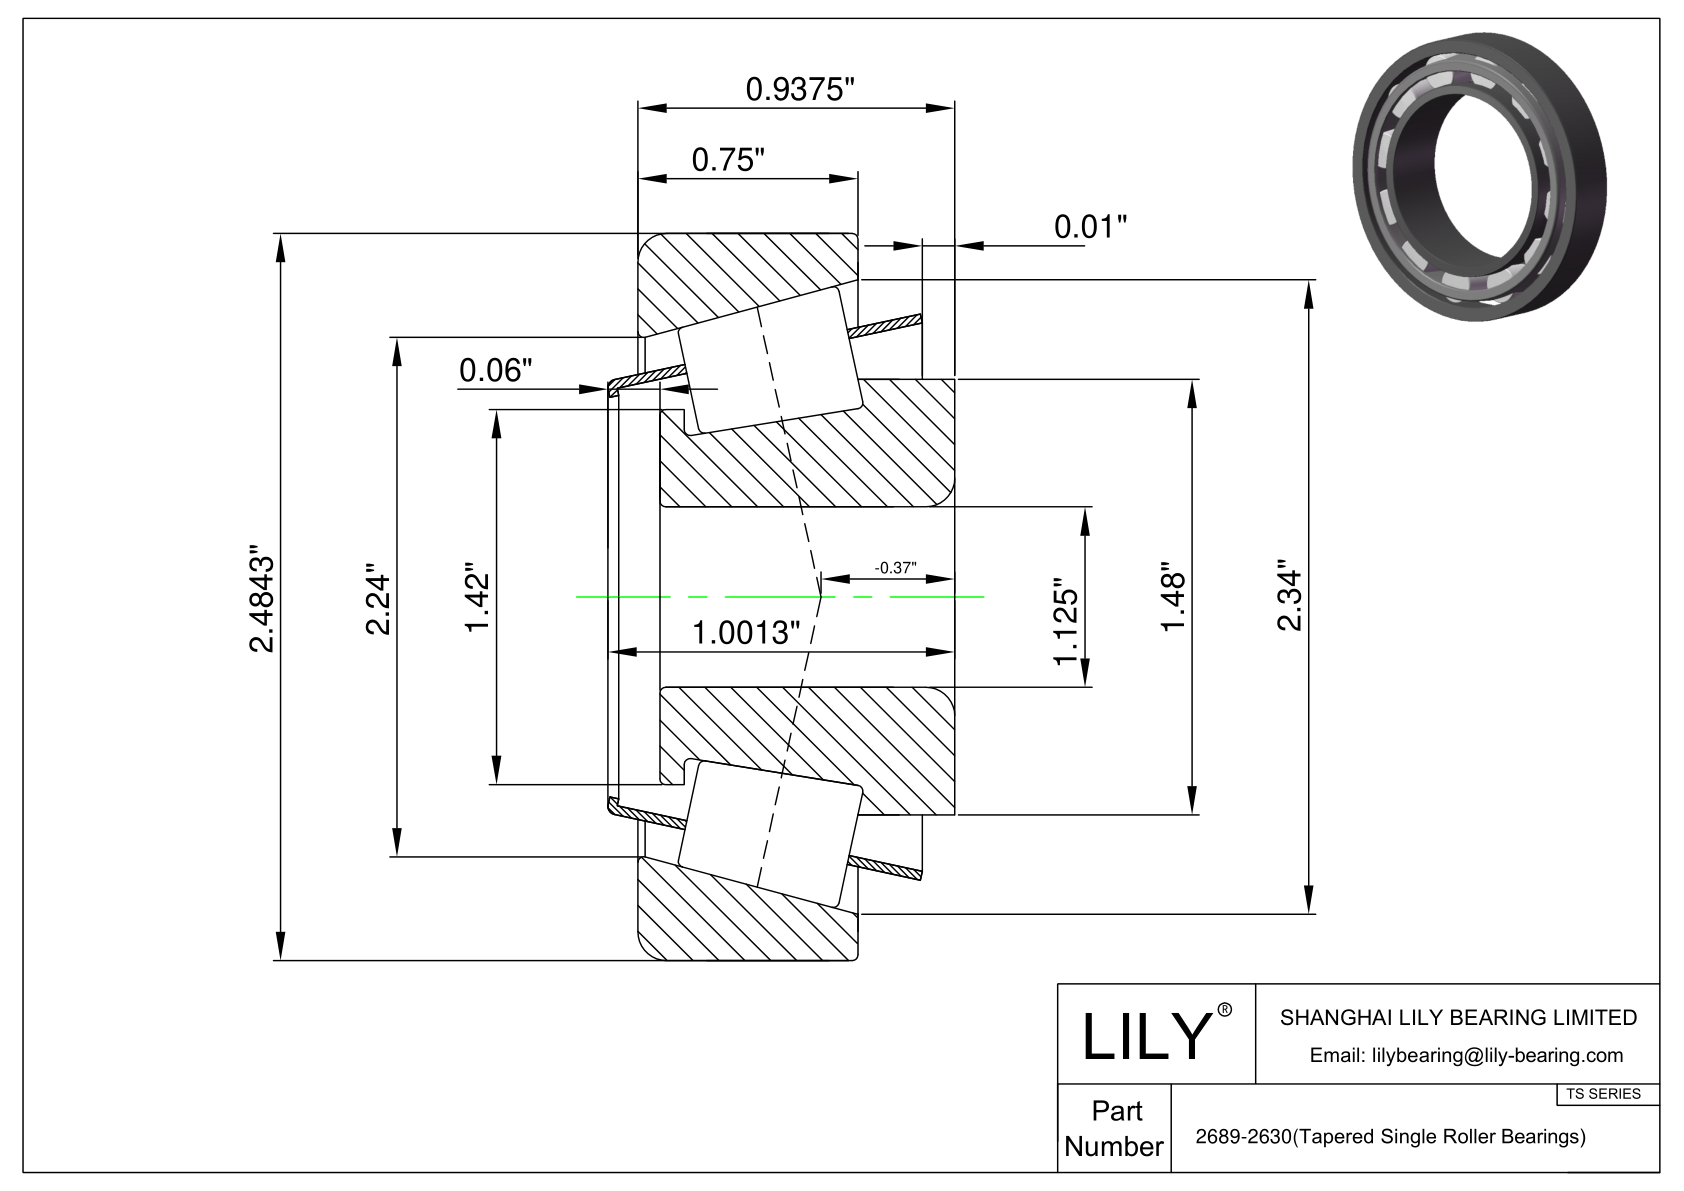 2689-2630 TS (Tapered Single Roller Bearings) (Imperial) cad drawing